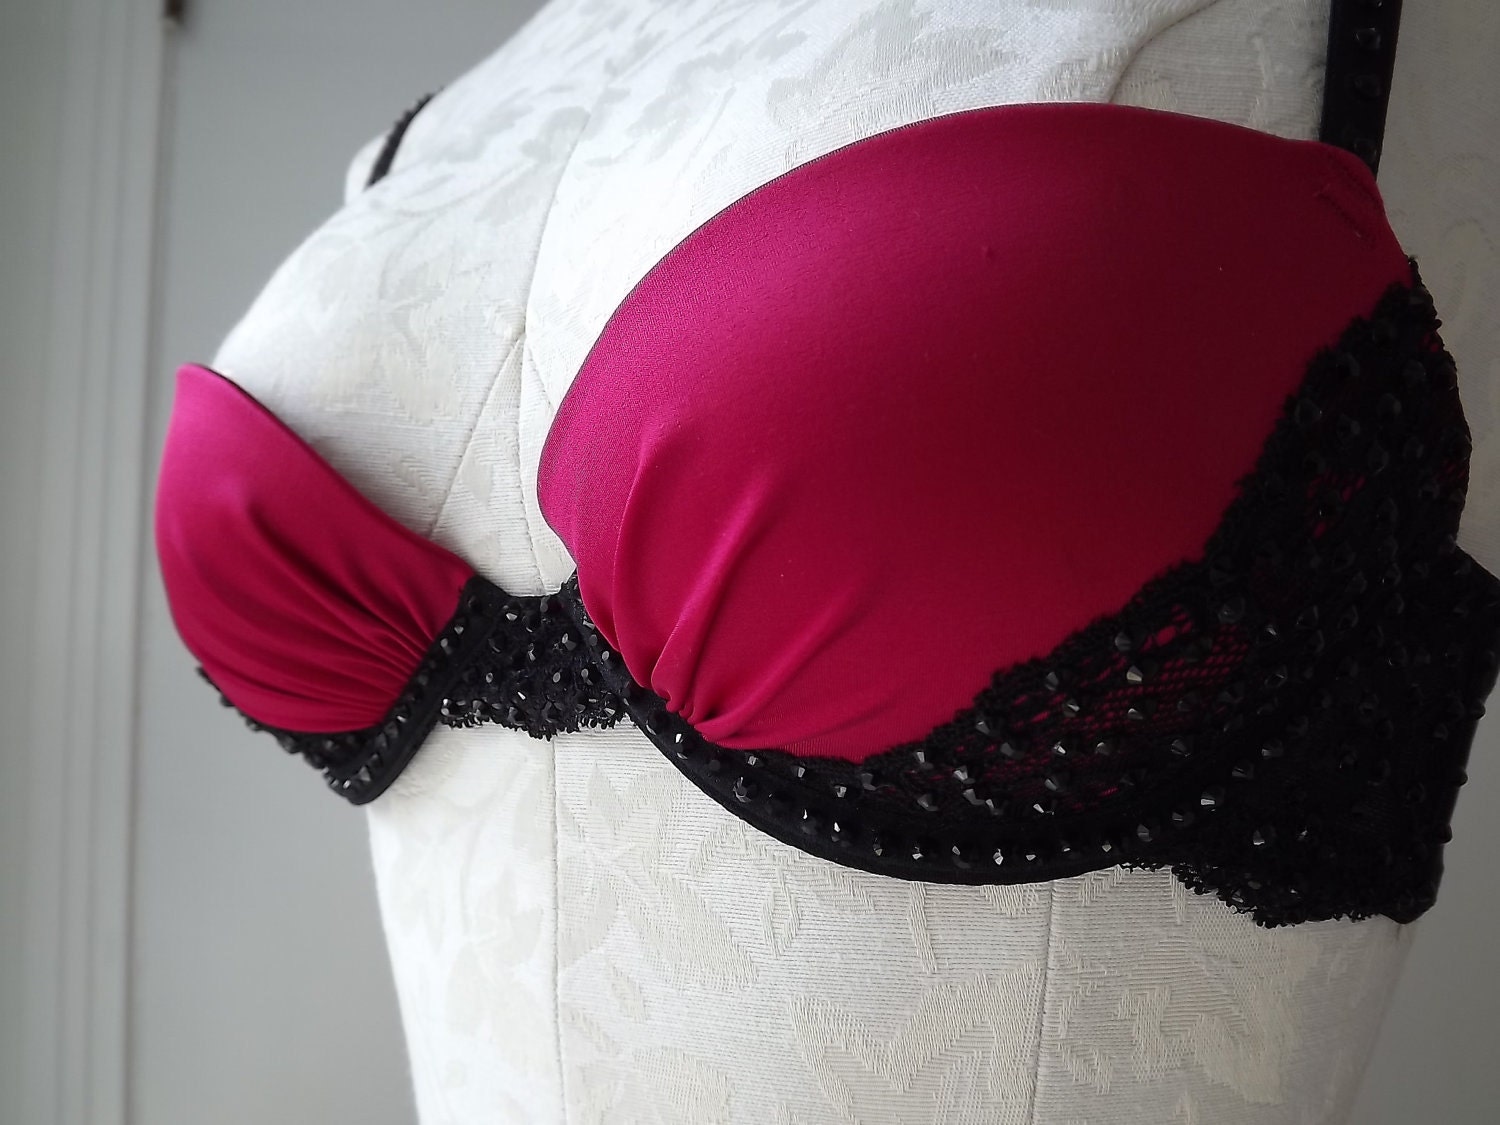 32A Red and Black Lace Bra with 300 Jet Rhinestones Burlesque Dancer Costume - DecadentDameDesigns